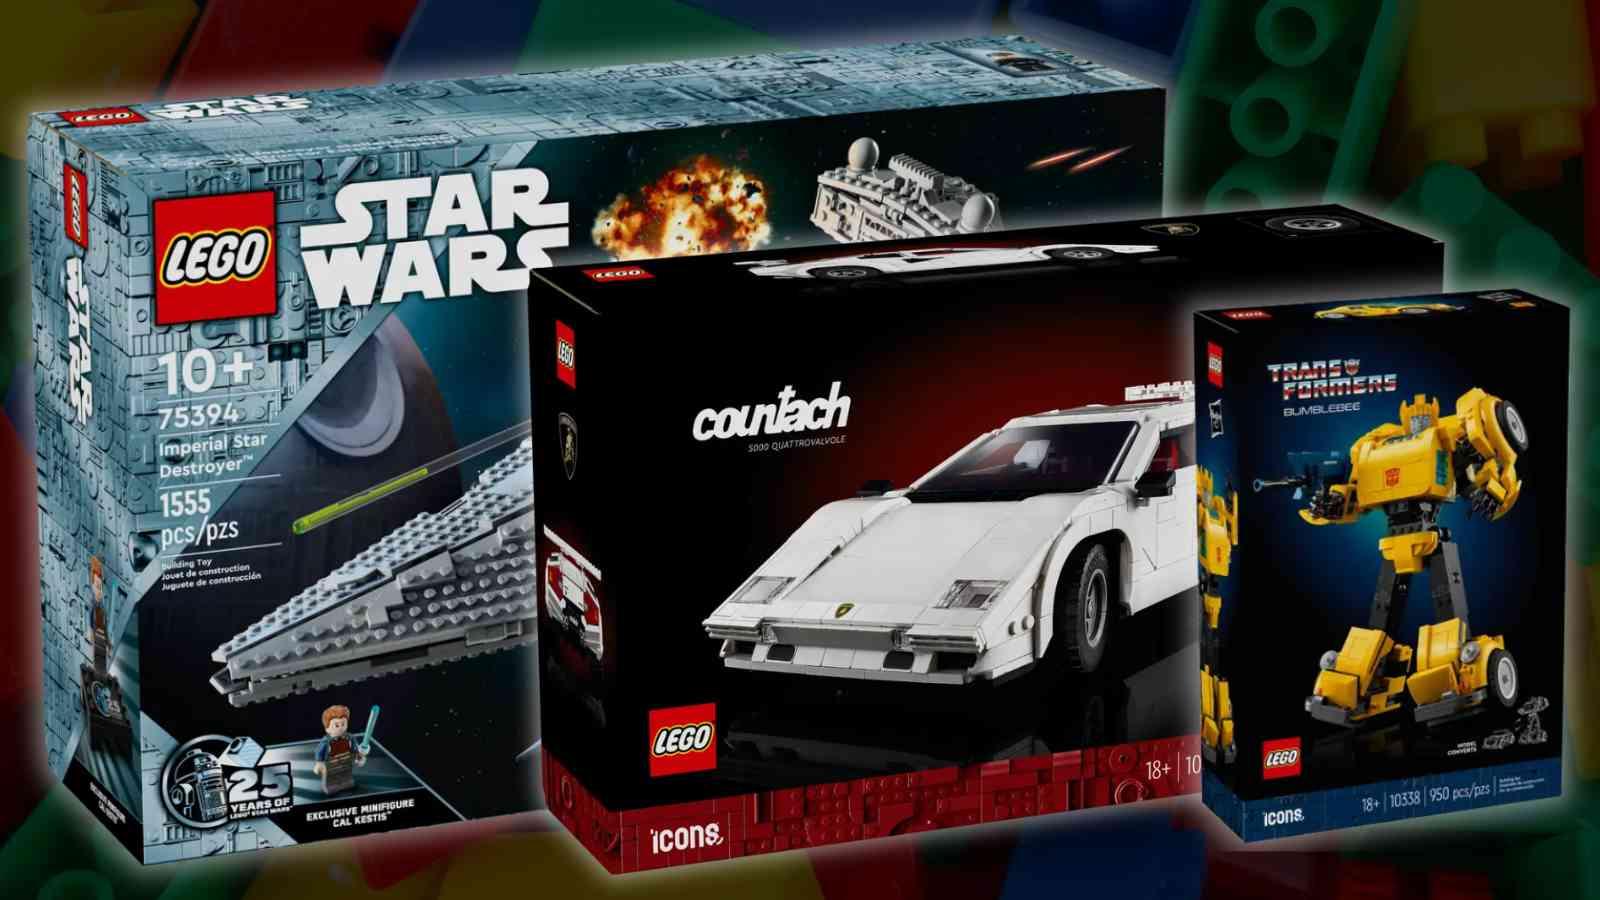 Three of the upcoming LEGO sets